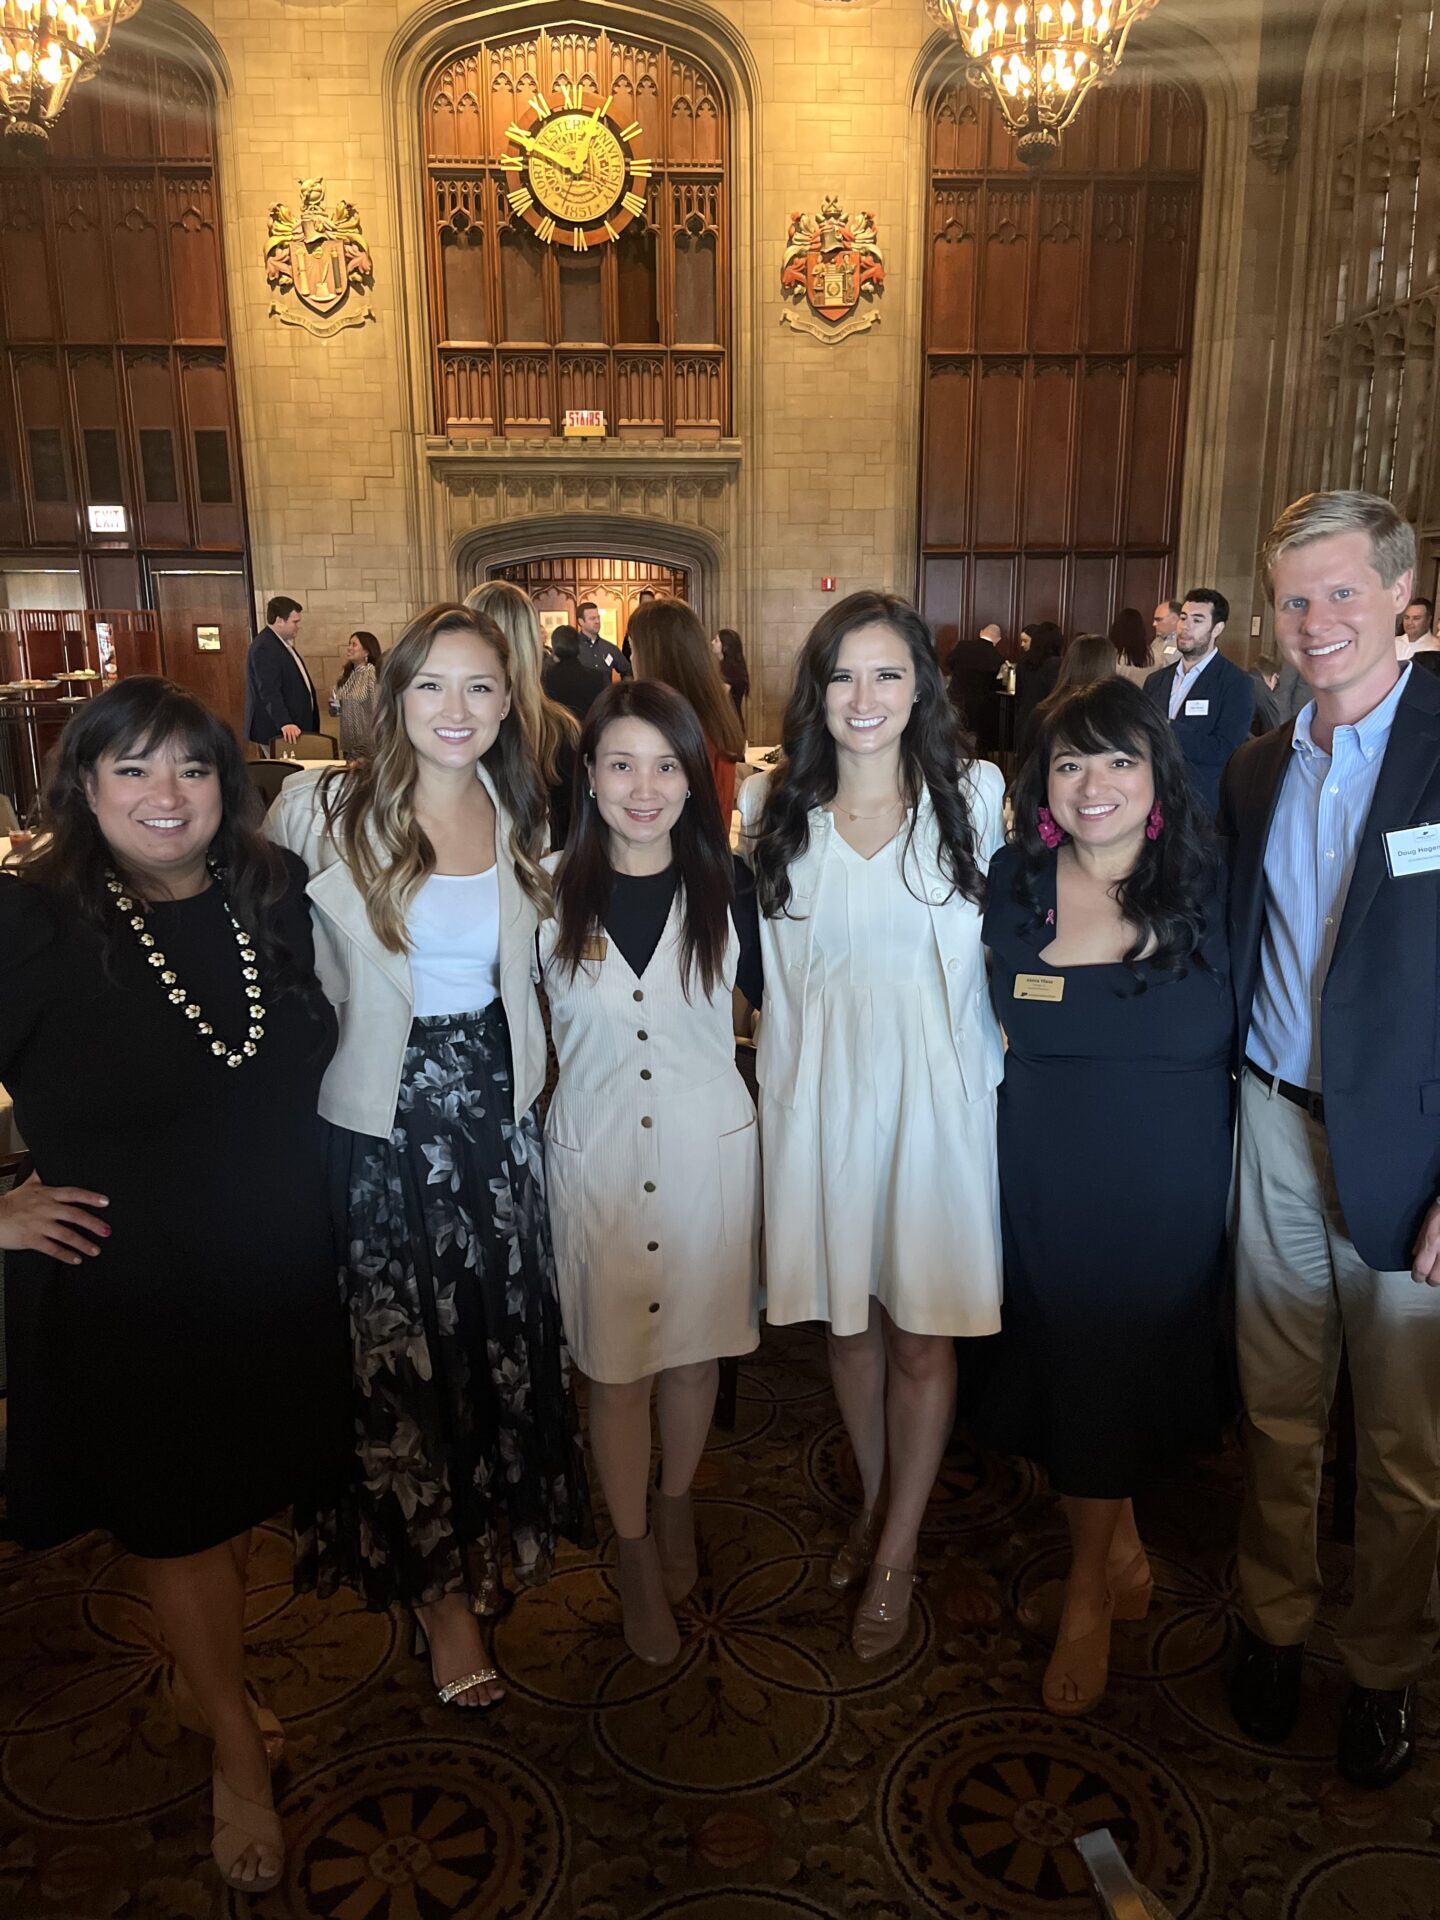 💛 Sunday Brunch in Chicago! 💛 A big thanks to alumni club presidents Giovanna Krozel and Rochelle Z. for their warm welcome and Lance Connolly and Jeri Bowman for creating a magical experience in this historical setting.